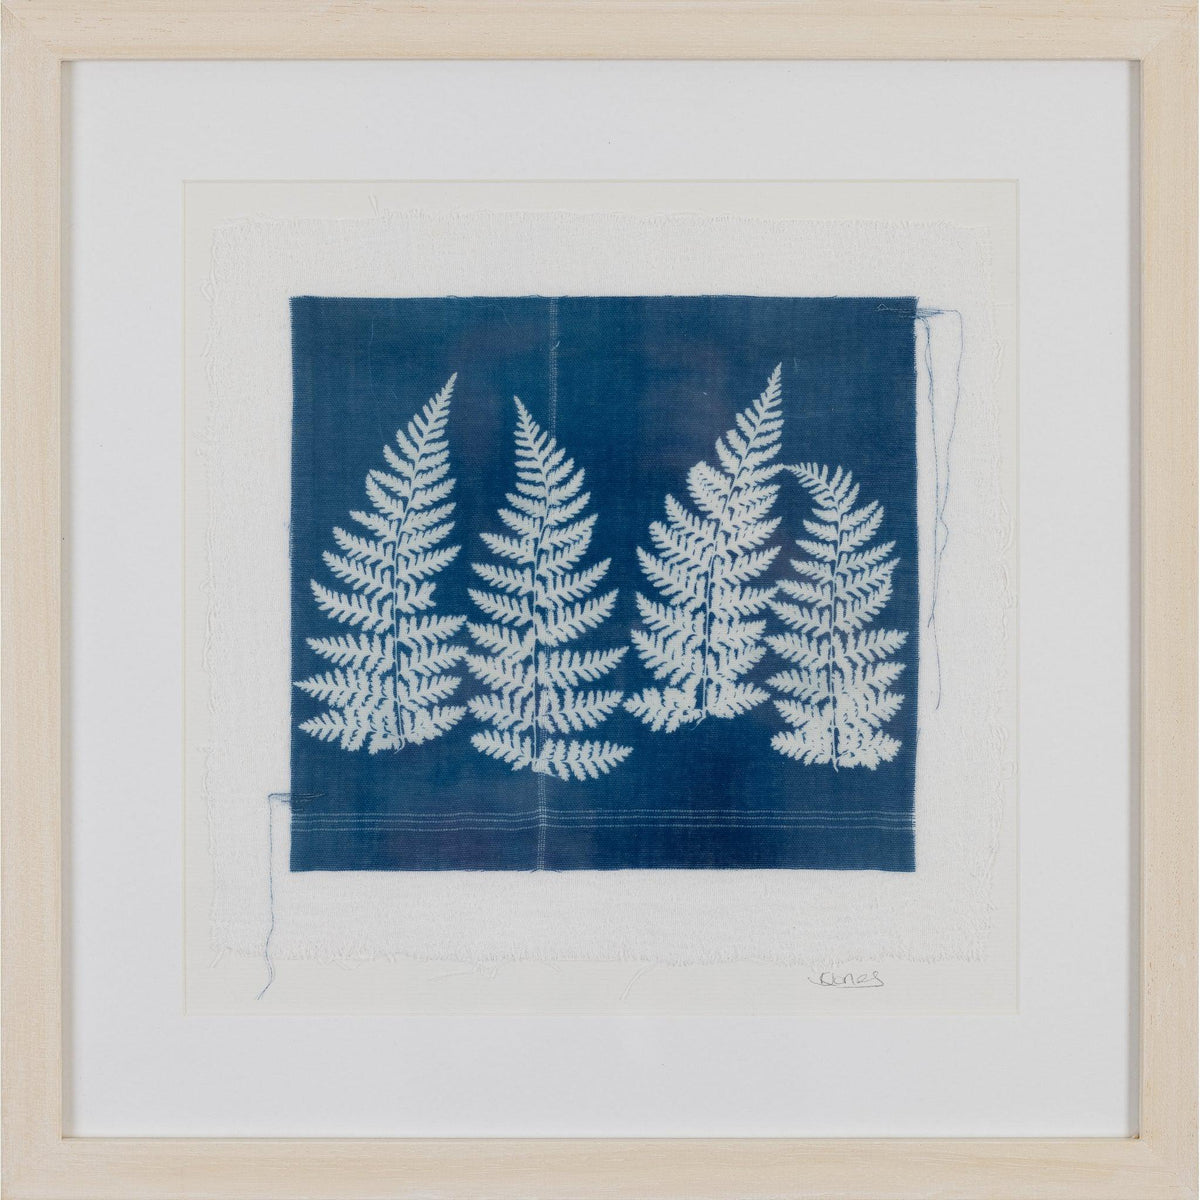 &#39;Ferns&#39; Cyanotype by Karen Jones, available at Padstow Gallery, Cornwall